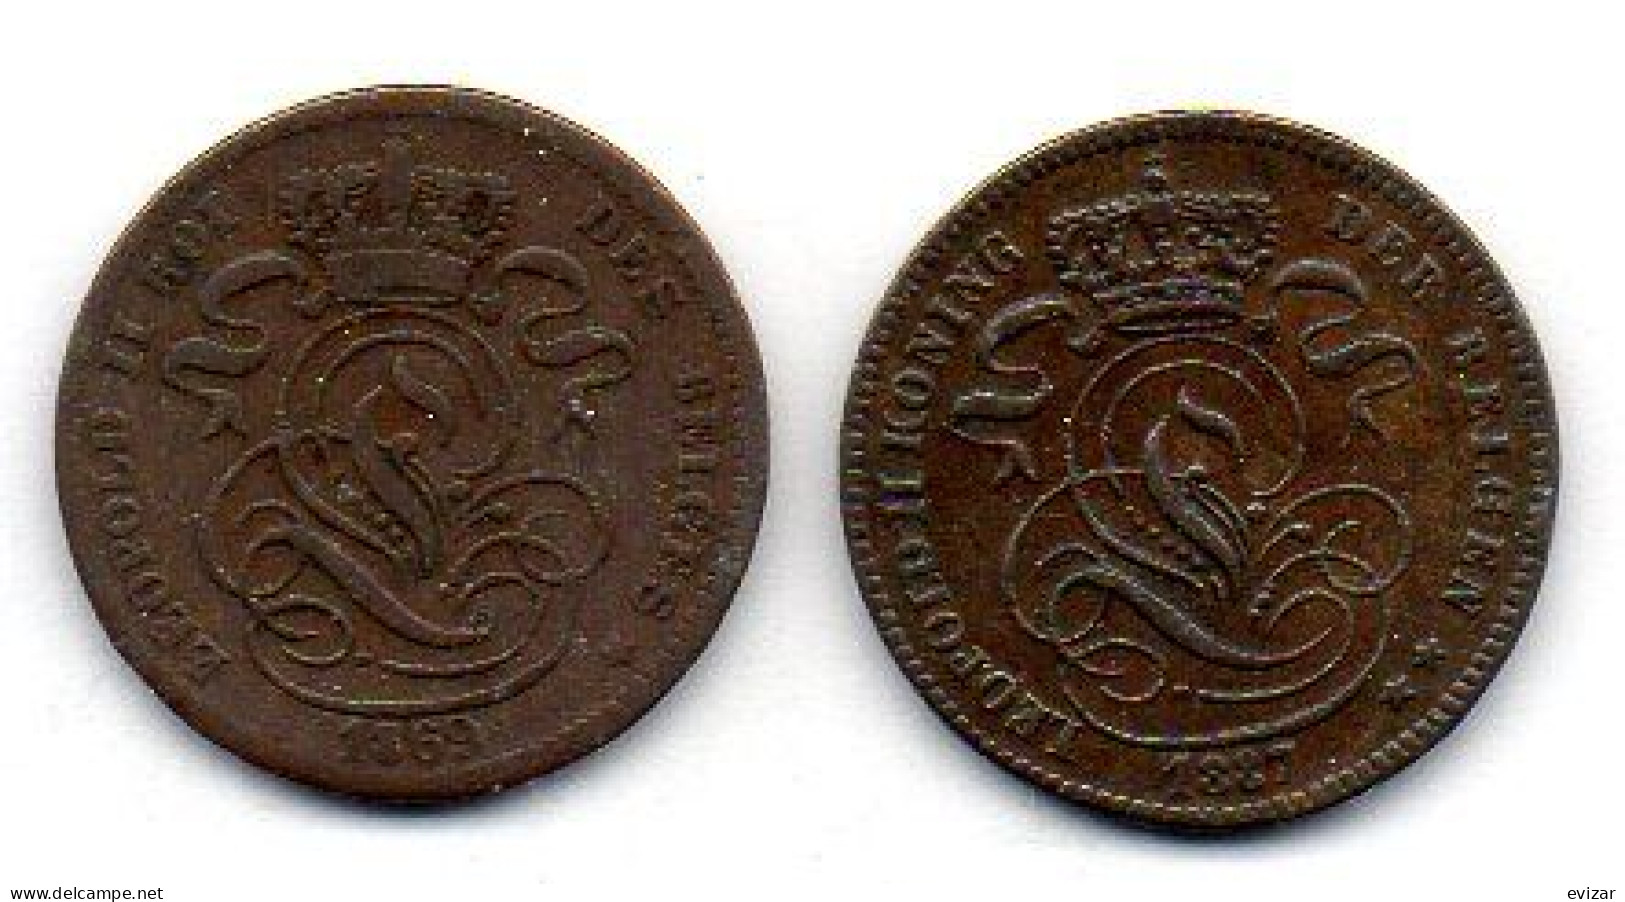 BELGIUM - Set Of Two Coins 2 Centimes, Copper, Year 1835, KM # 4.1, 4.2, Wide & Narrow Rims - 2 Centimes